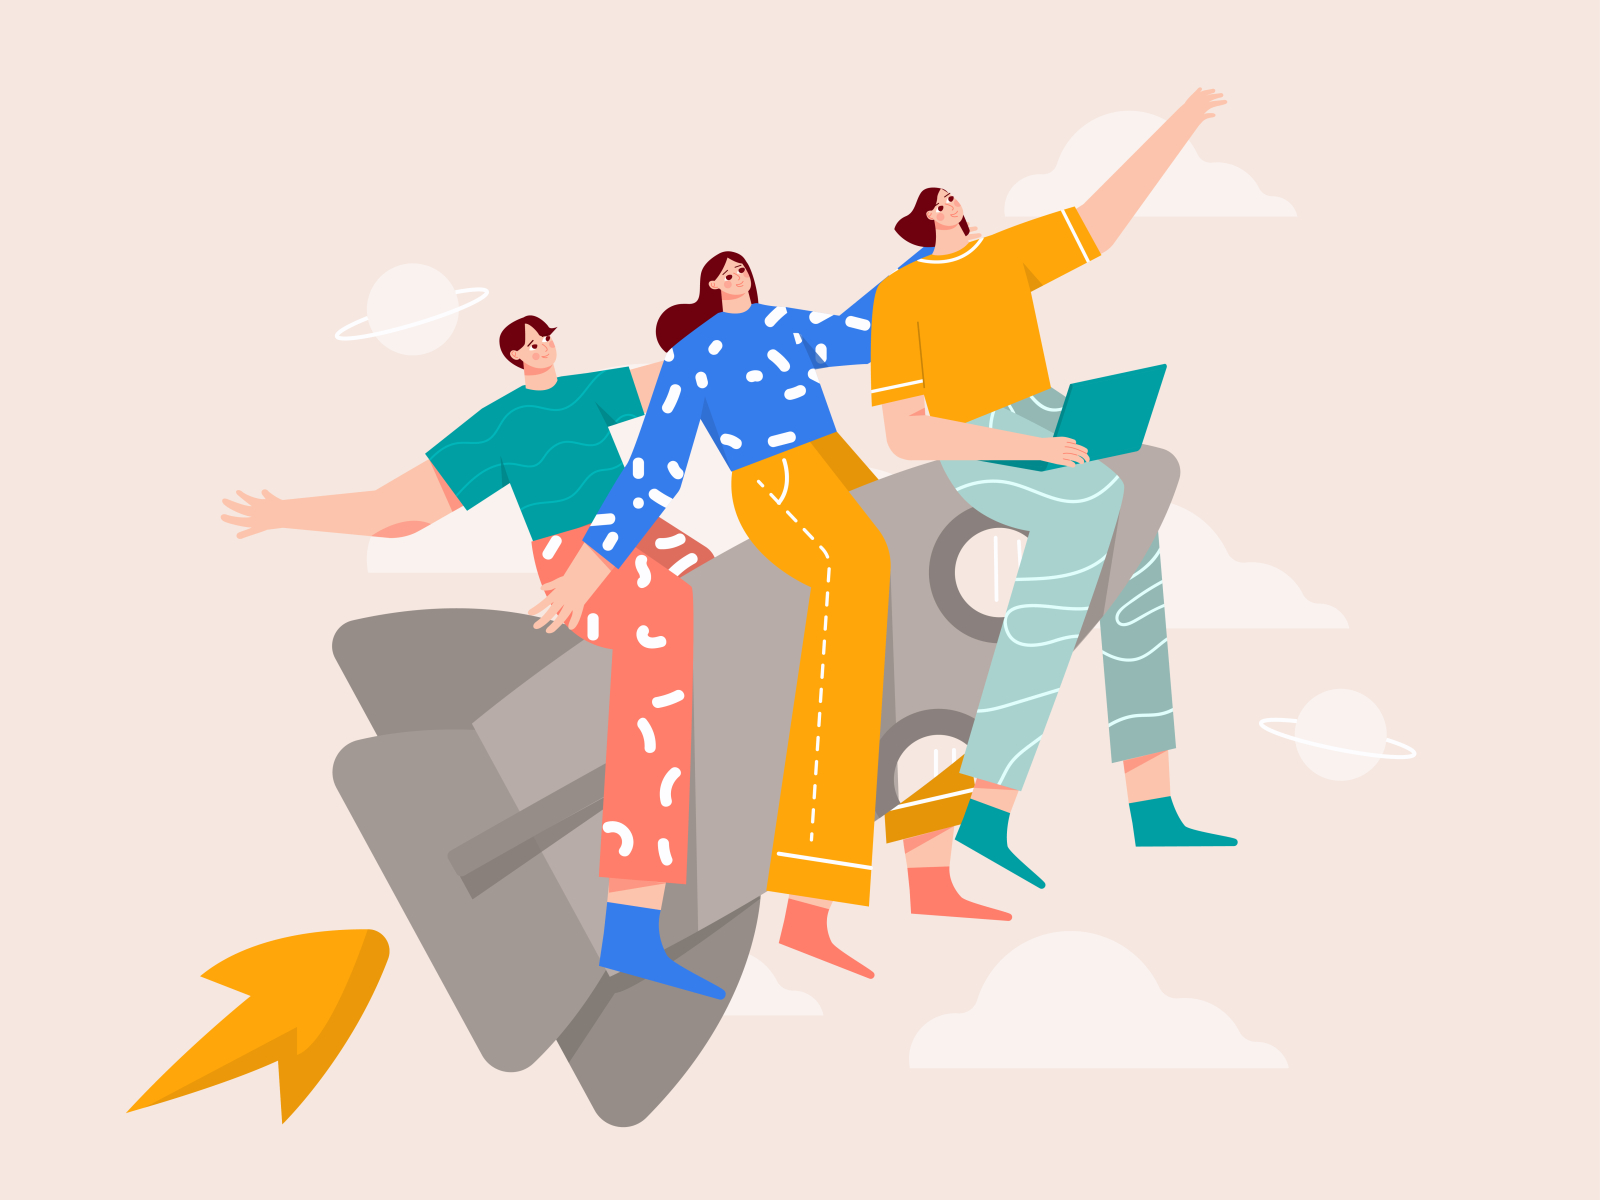 Launching new product illustration flat illustration womans release product launch startup team illustration group illustration empowered woman rockets launch rocket product design new product product team illustration character business b2b illustration